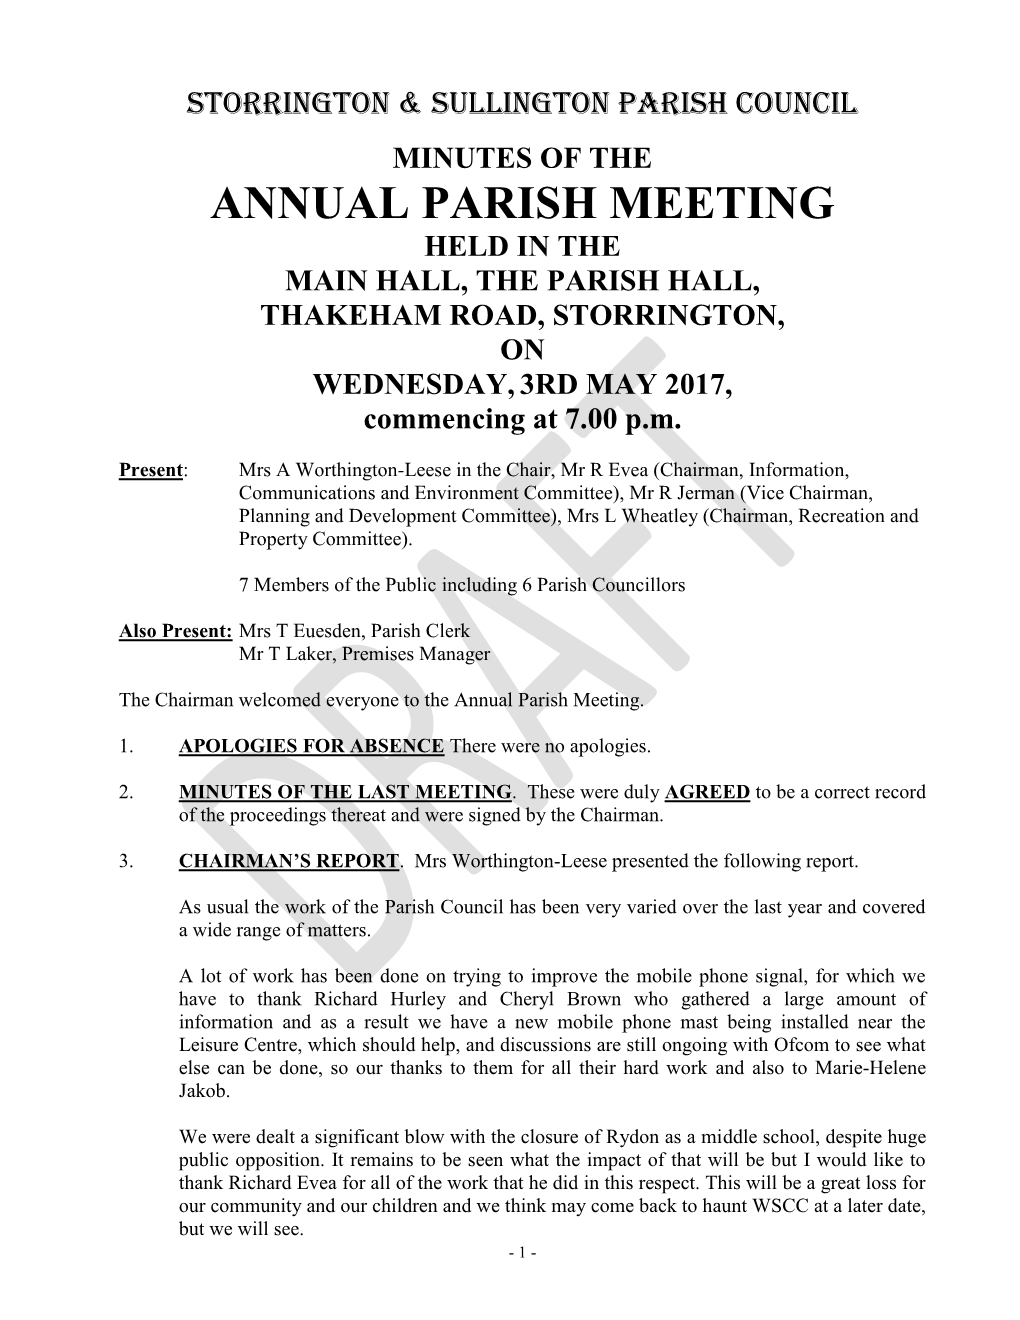 MINUTES of the ANNUAL PARISH MEETING HELD in the MAIN HALL, the PARISH HALL, THAKEHAM ROAD, STORRINGTON, on WEDNESDAY, 3RD MAY 2017, Commencing at 7.00 P.M